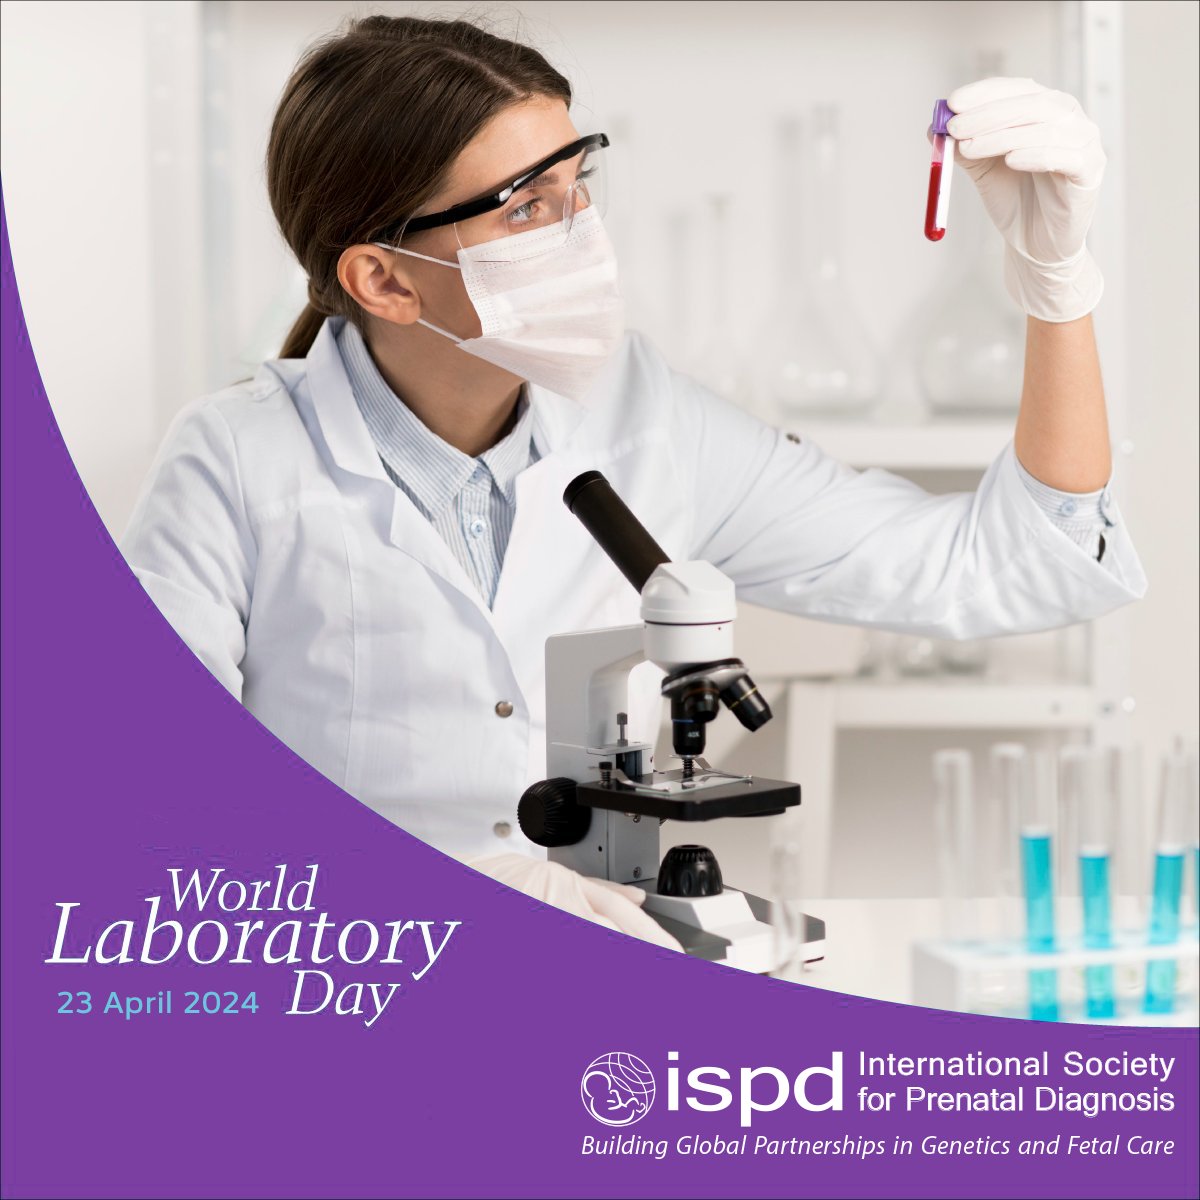 The cornerstones of #prenataldiagnosis and modern #fetalmedicine are laid in research laboratories. On this #WorldLaboratoryDay, join ISPD as we honor the dedication of laboratory technicians and research staff.